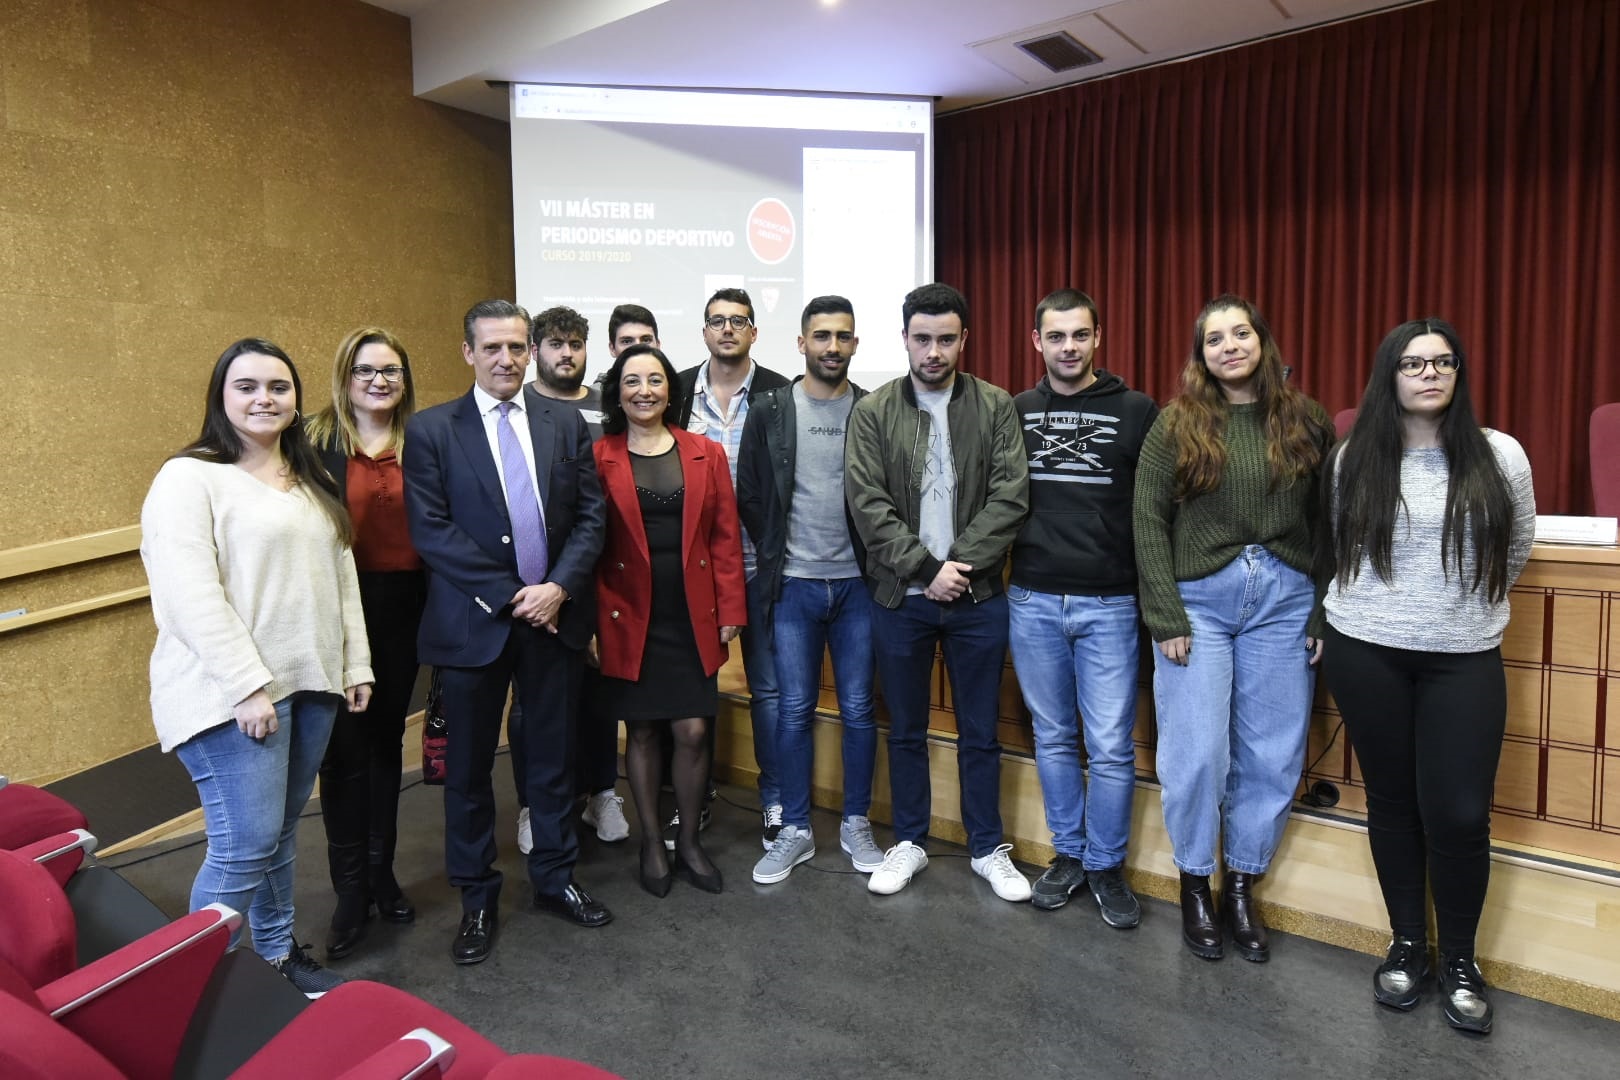 José María Cruz with students in the Faculty of Communication at the University of Sevilla